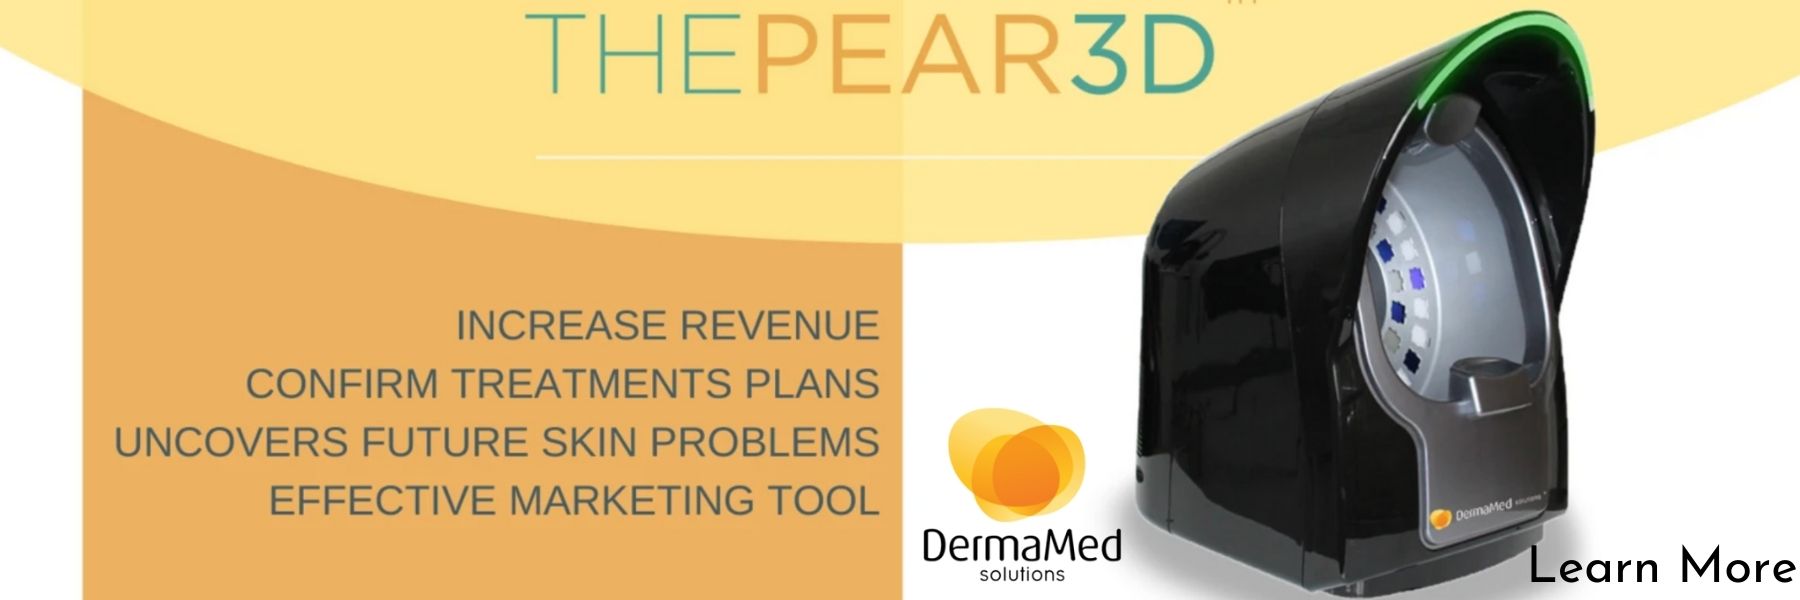 DermaMed Solutions The Pear 3D